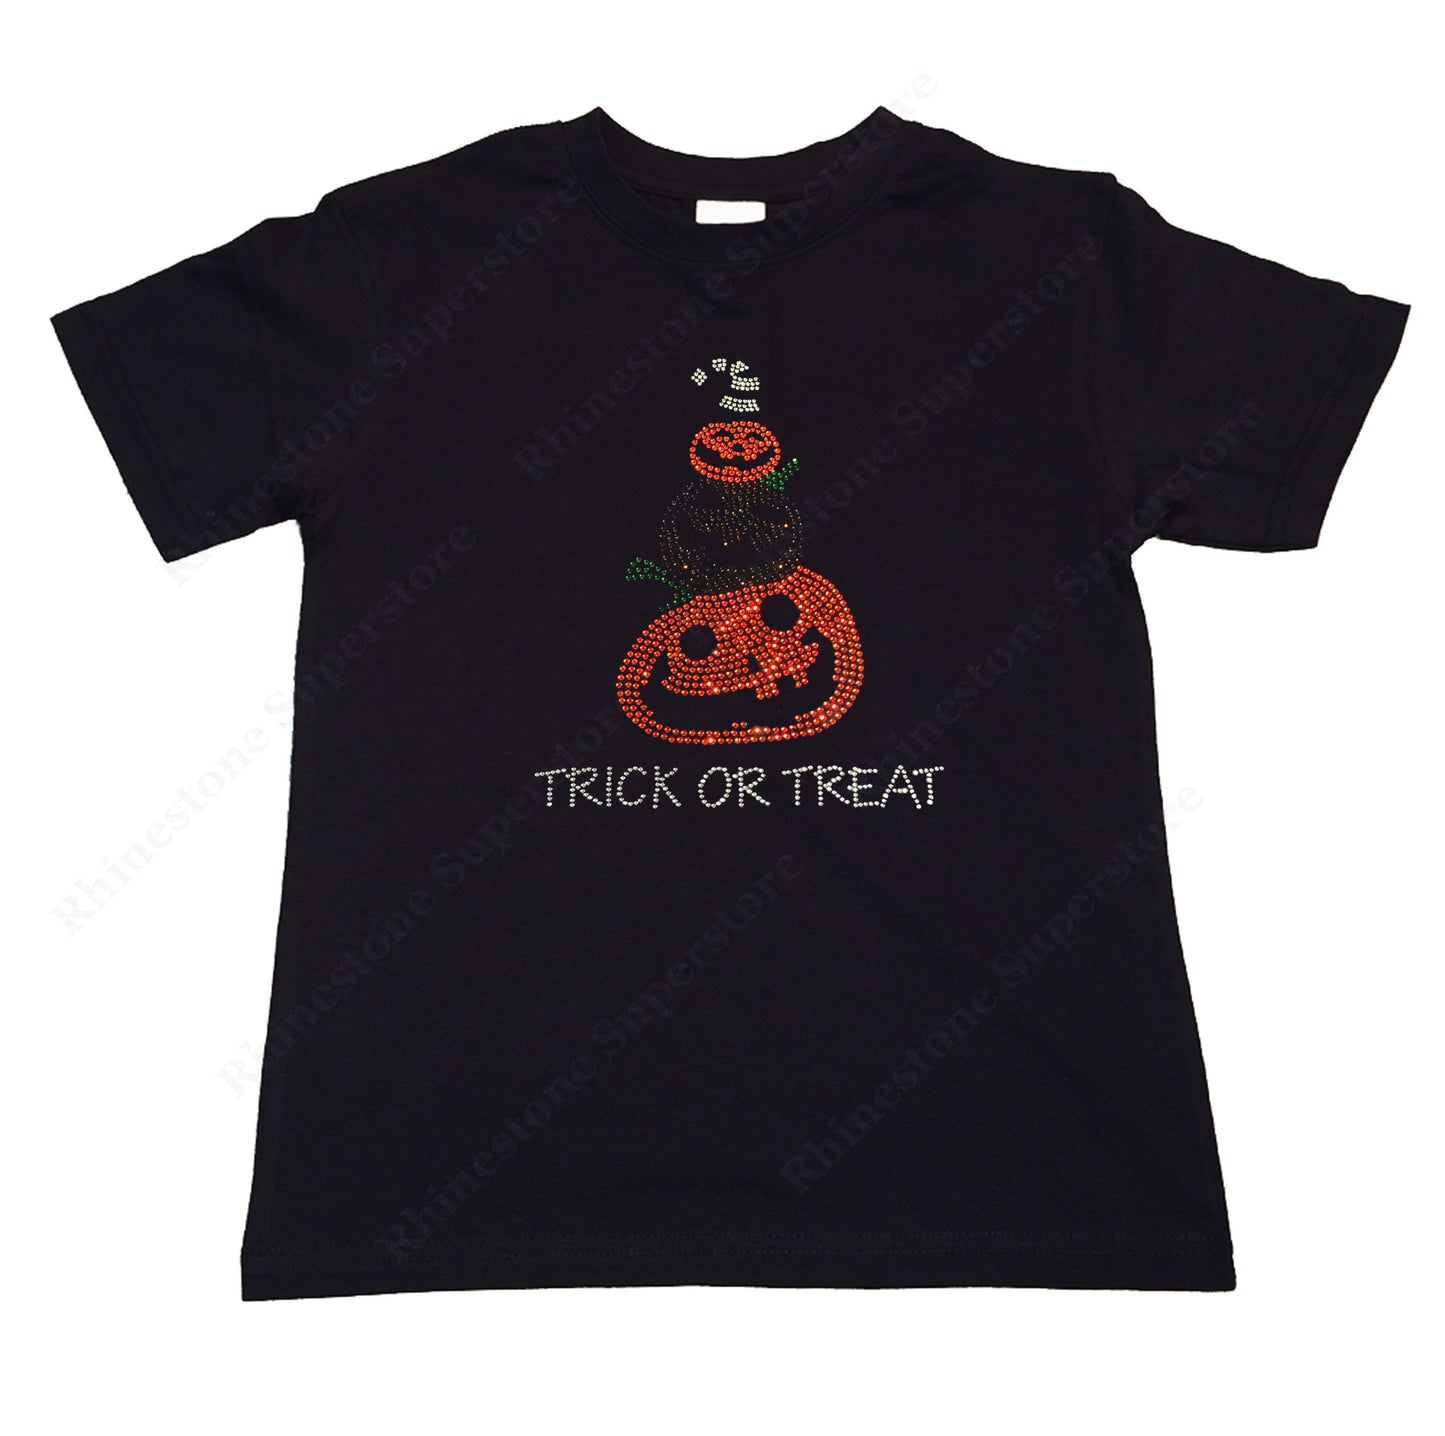 Girls Rhinestone T-Shirt " Halloween Pumpkins with Trick or Treat " Kids Size 3 to 14 Available